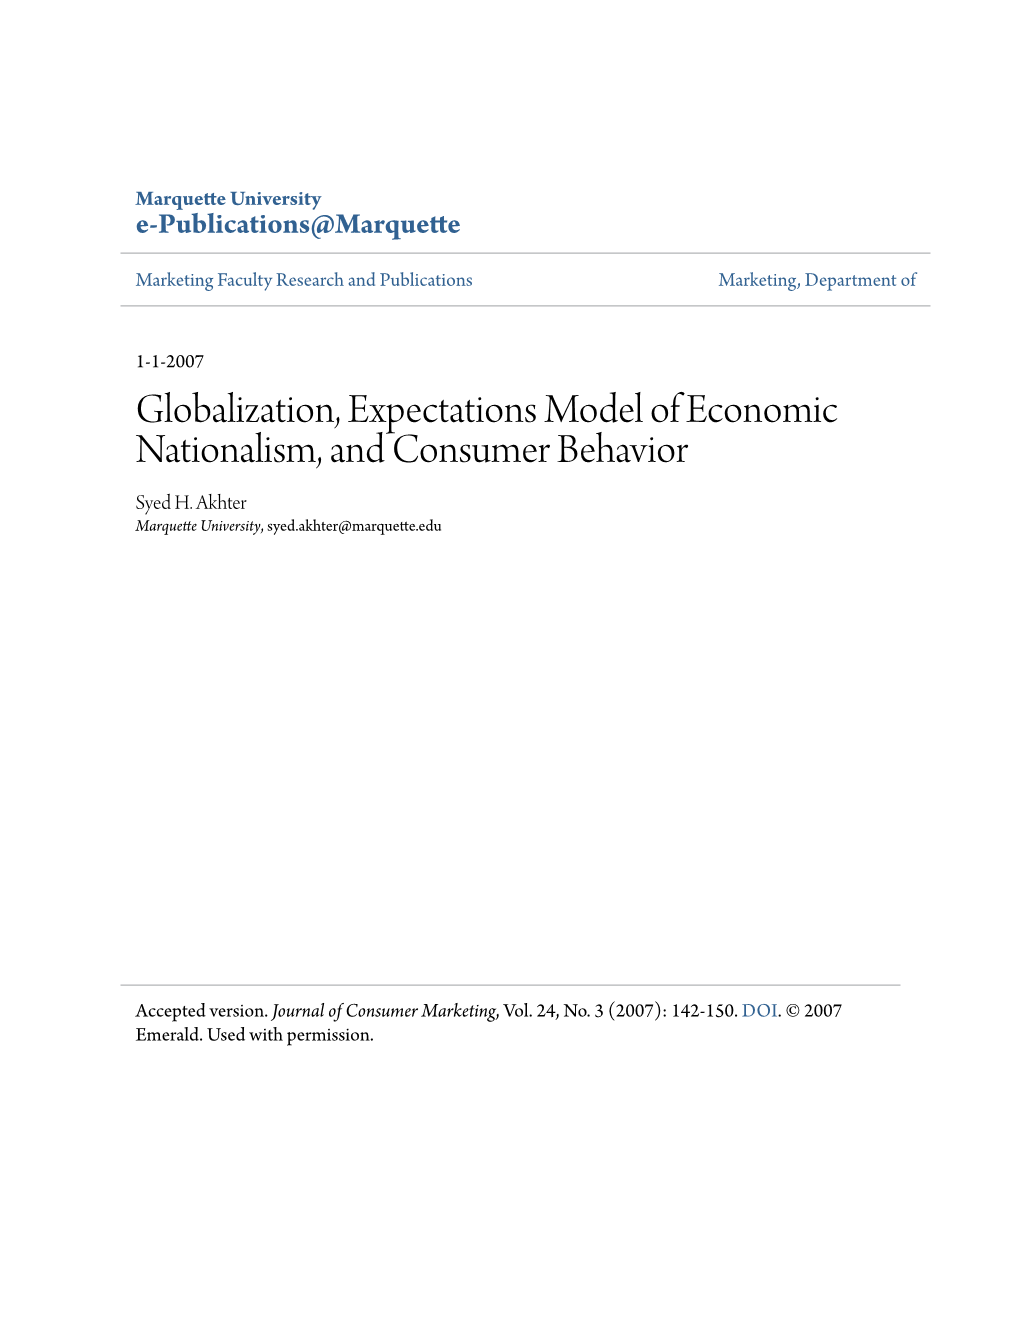 Globalization, Expectations Model of Economic Nationalism, and Consumer Behavior Syed H